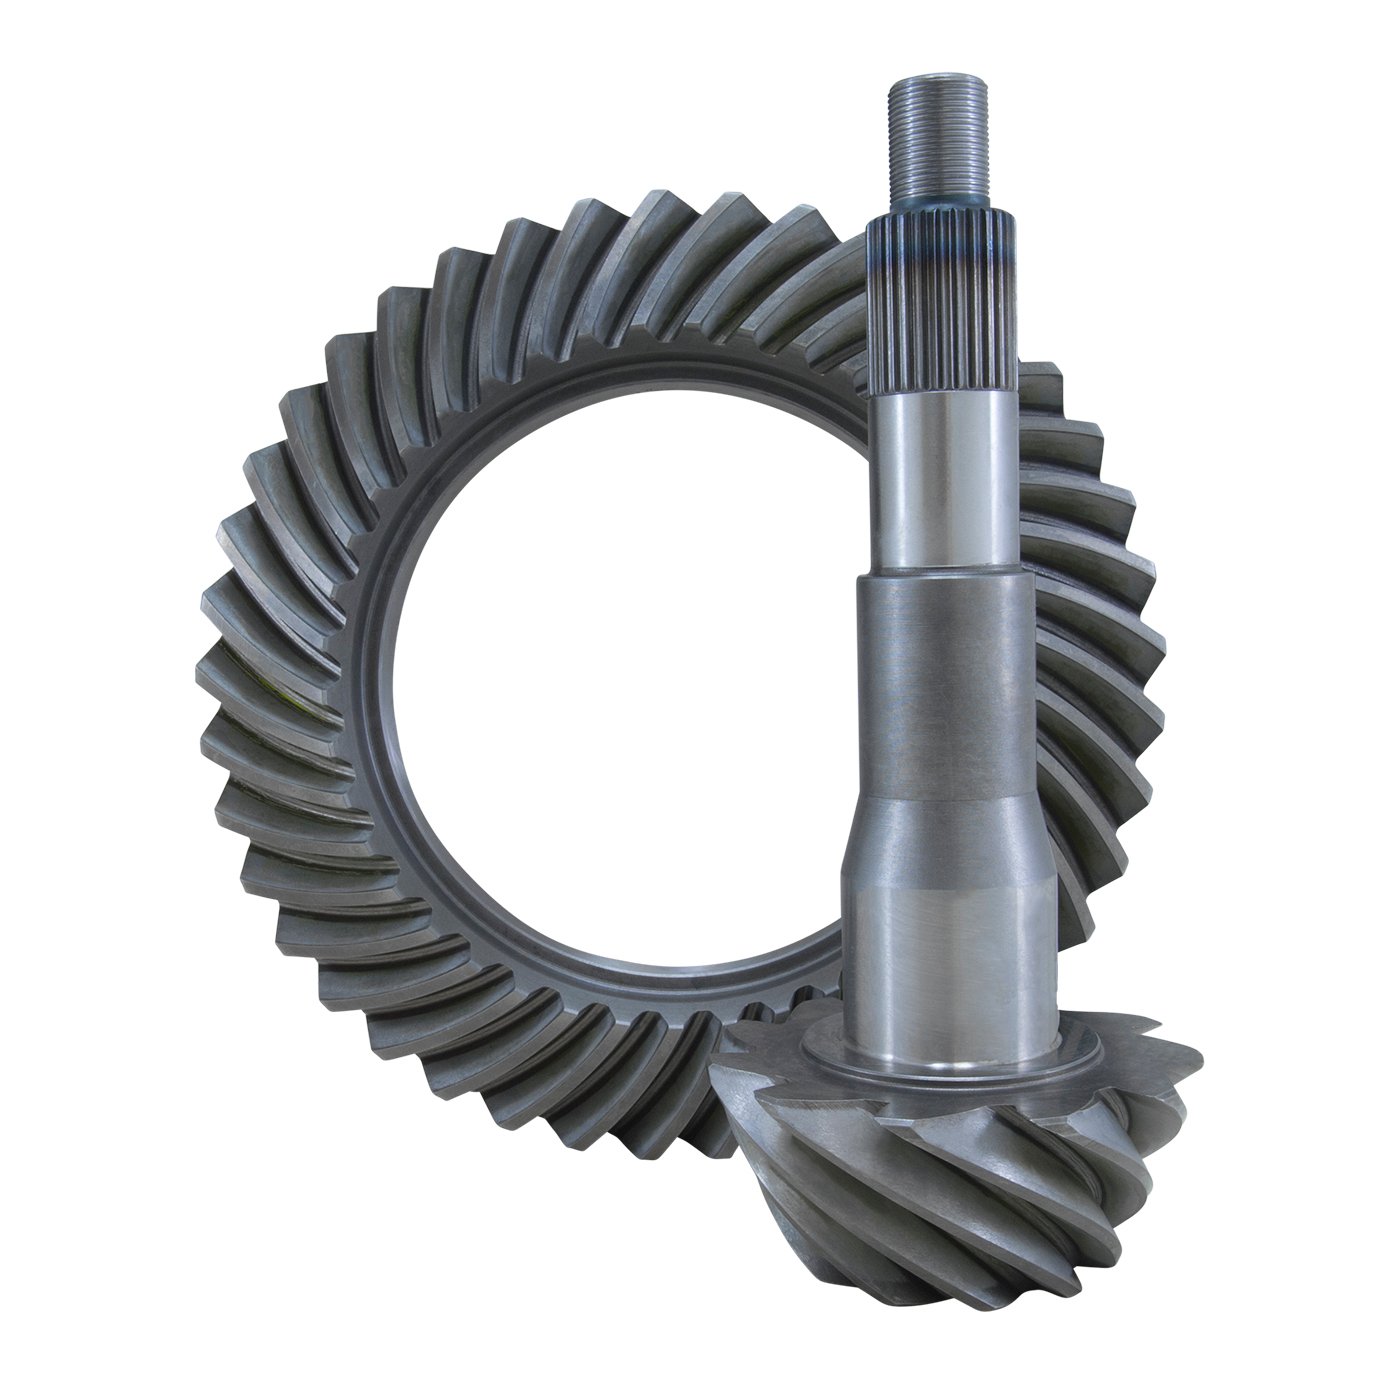 USA Standard 36111 Ring & Pinion Gear Set, For Ford 10.25 in., 5.13 Ratio